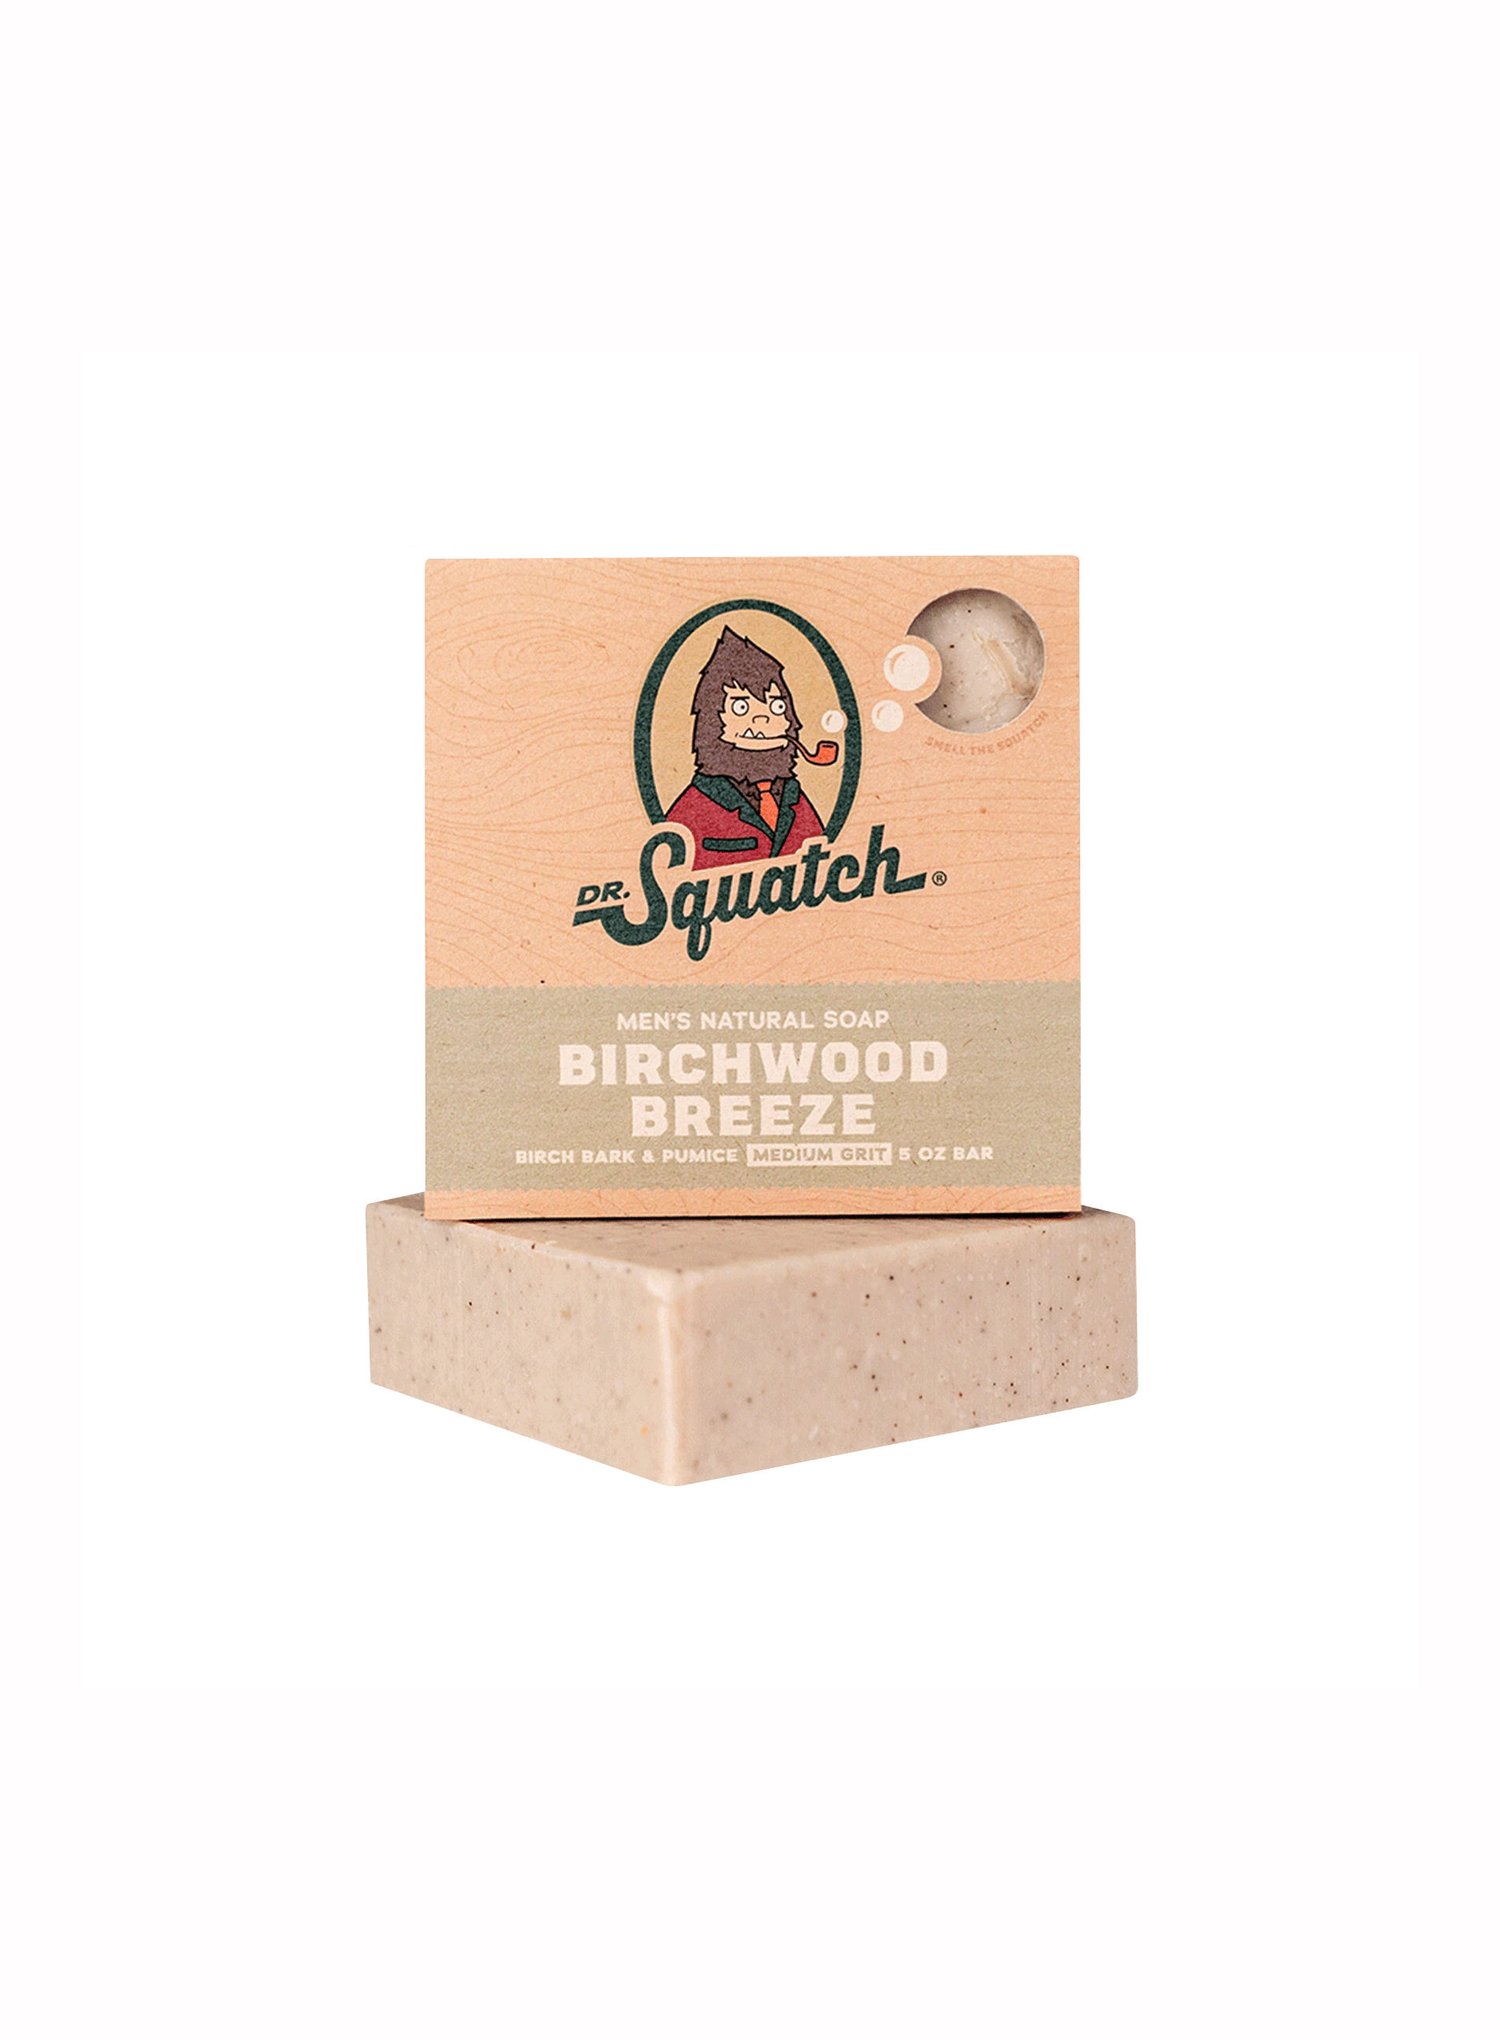 Dr. Squatch Birchwood Breeze Bar Soap — Lost Objects, Found Treasures